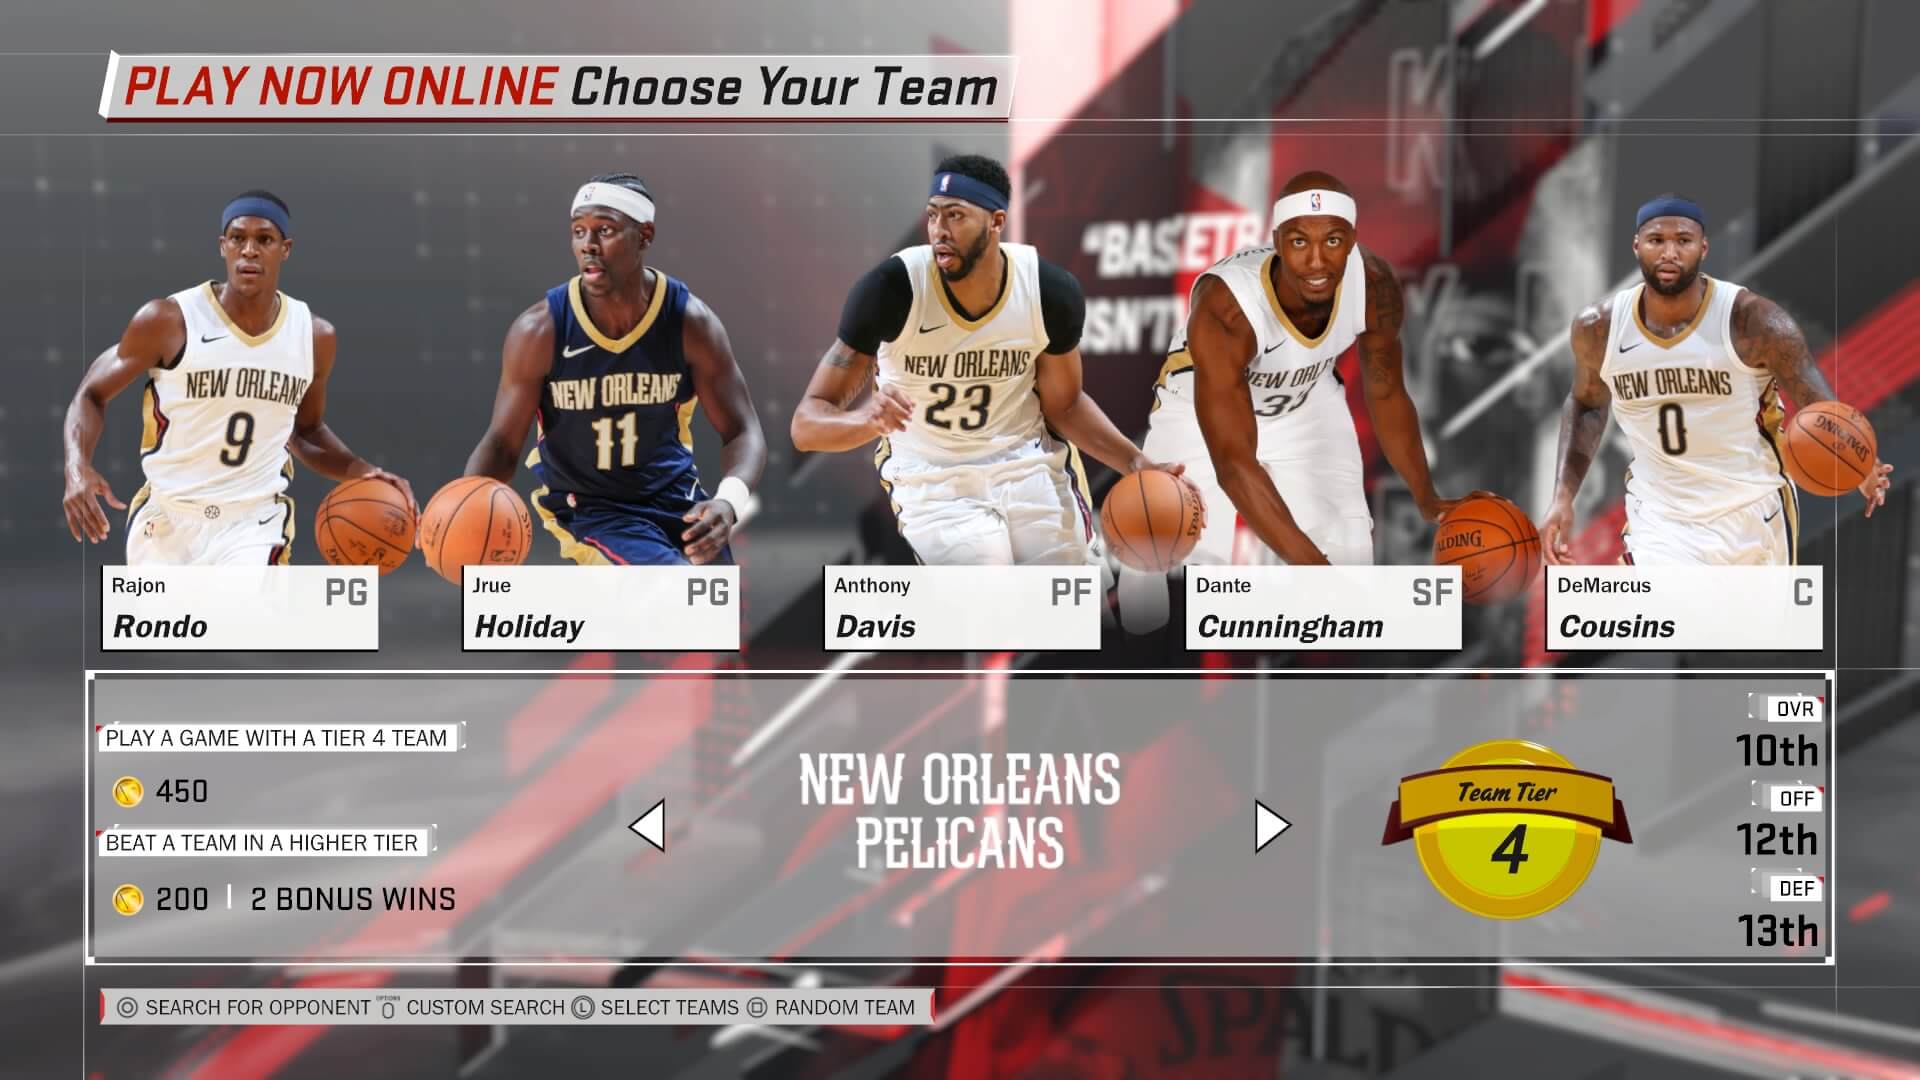 New Orleans Pelicans NBA 2K18 Team Roster